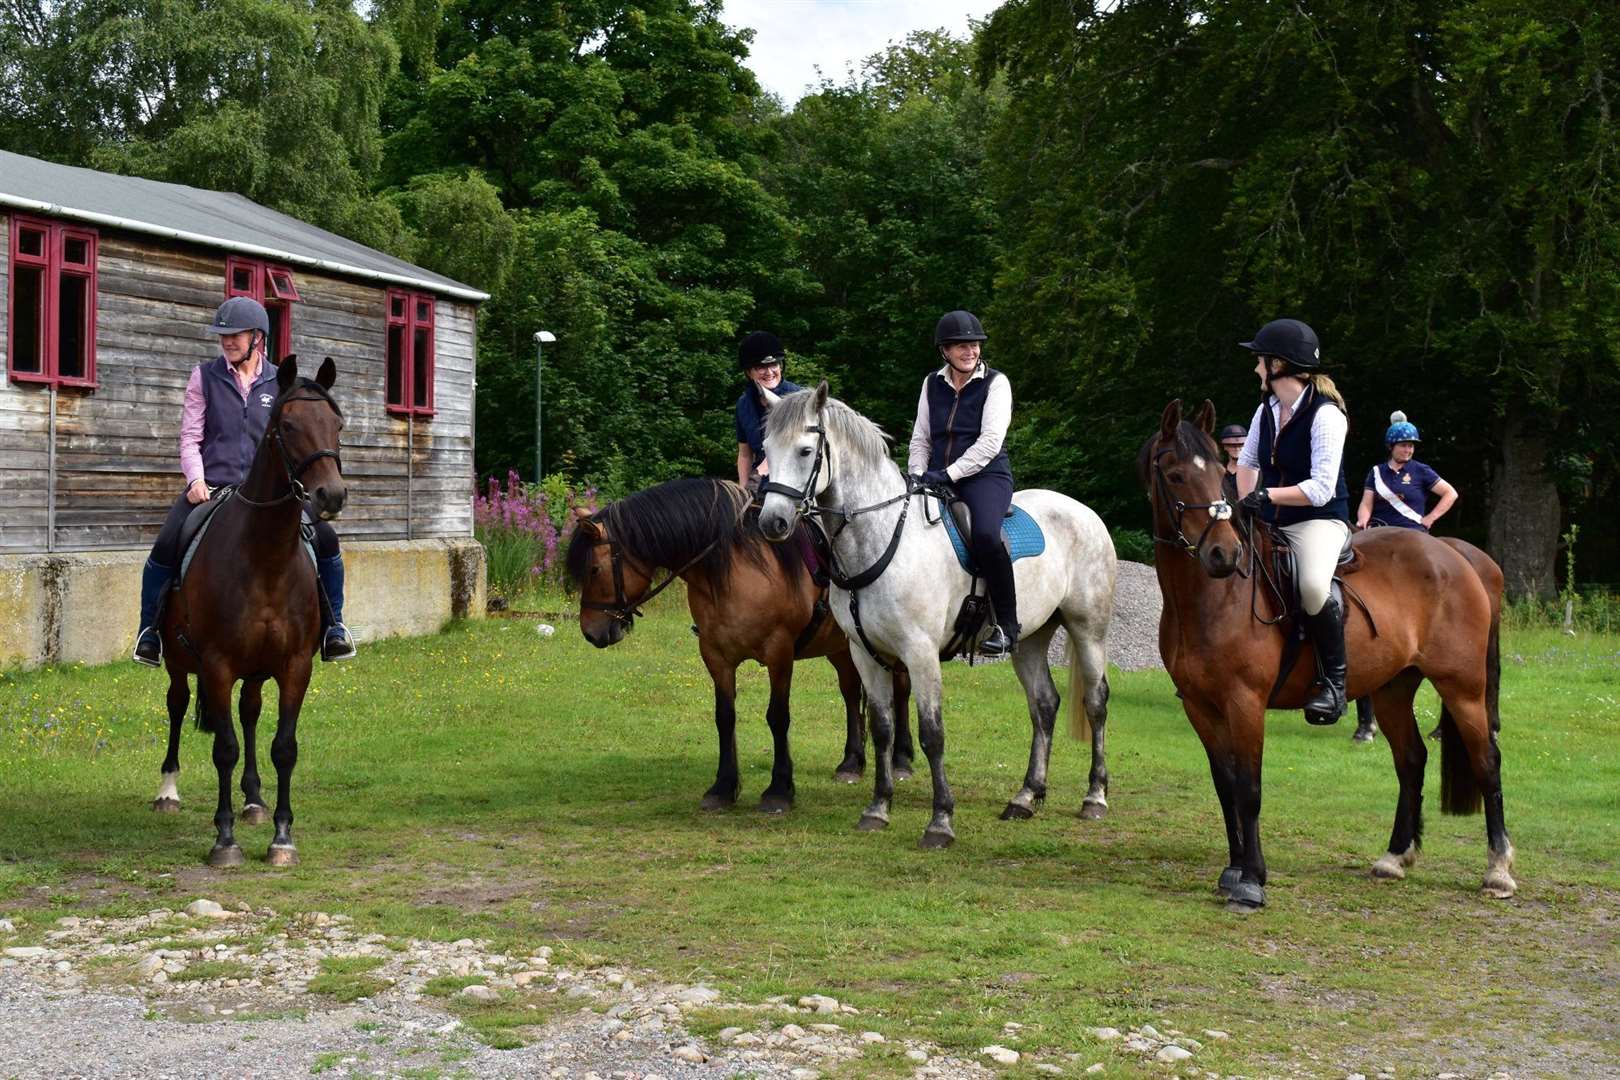 The riders gathered at Culrain Hall where tea was later served.